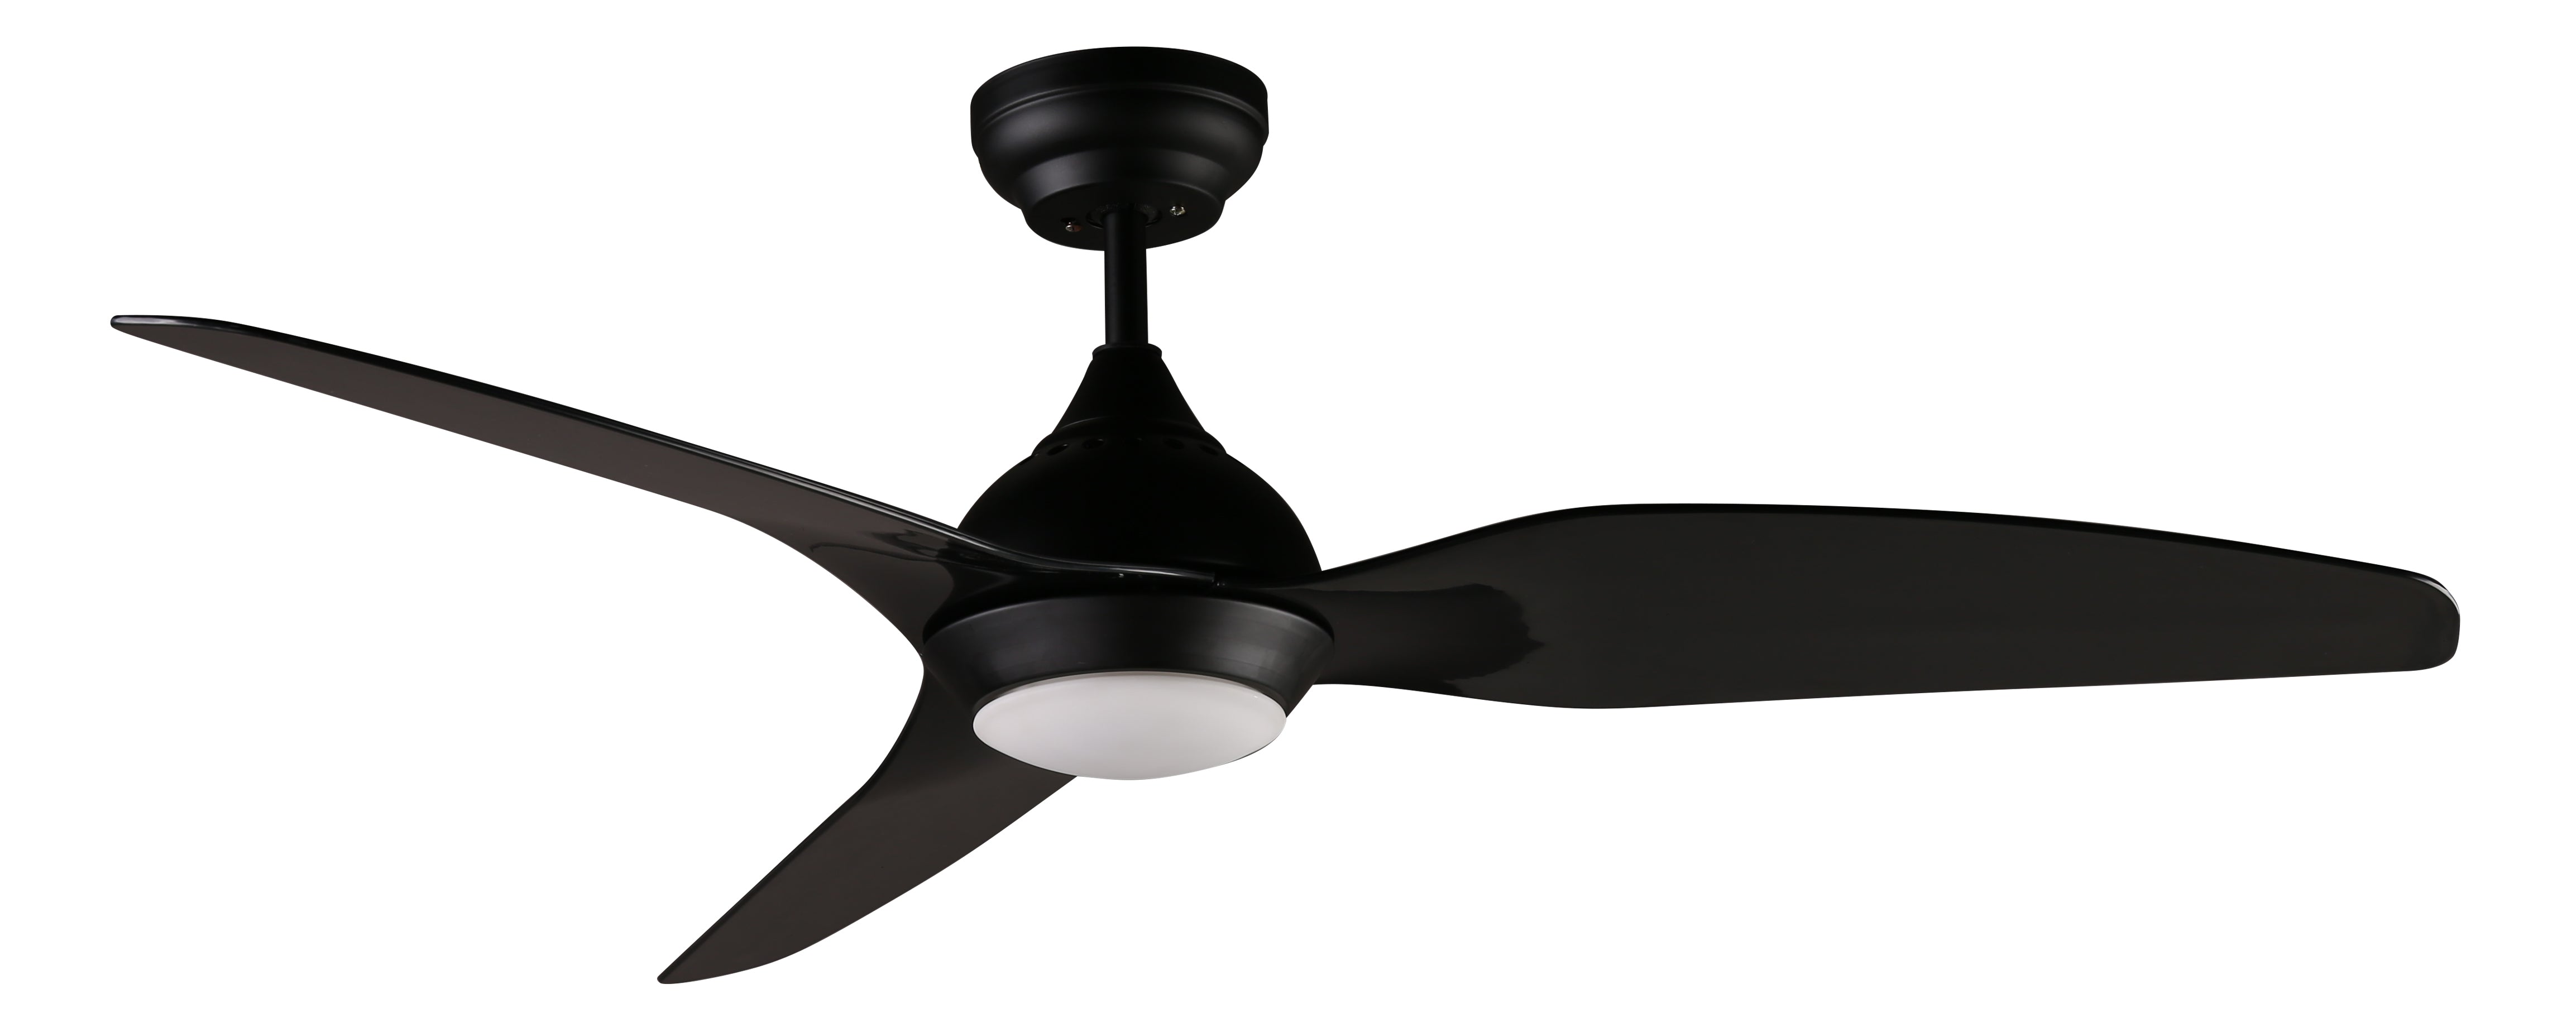 50 Ceiling Fan With Remote Control